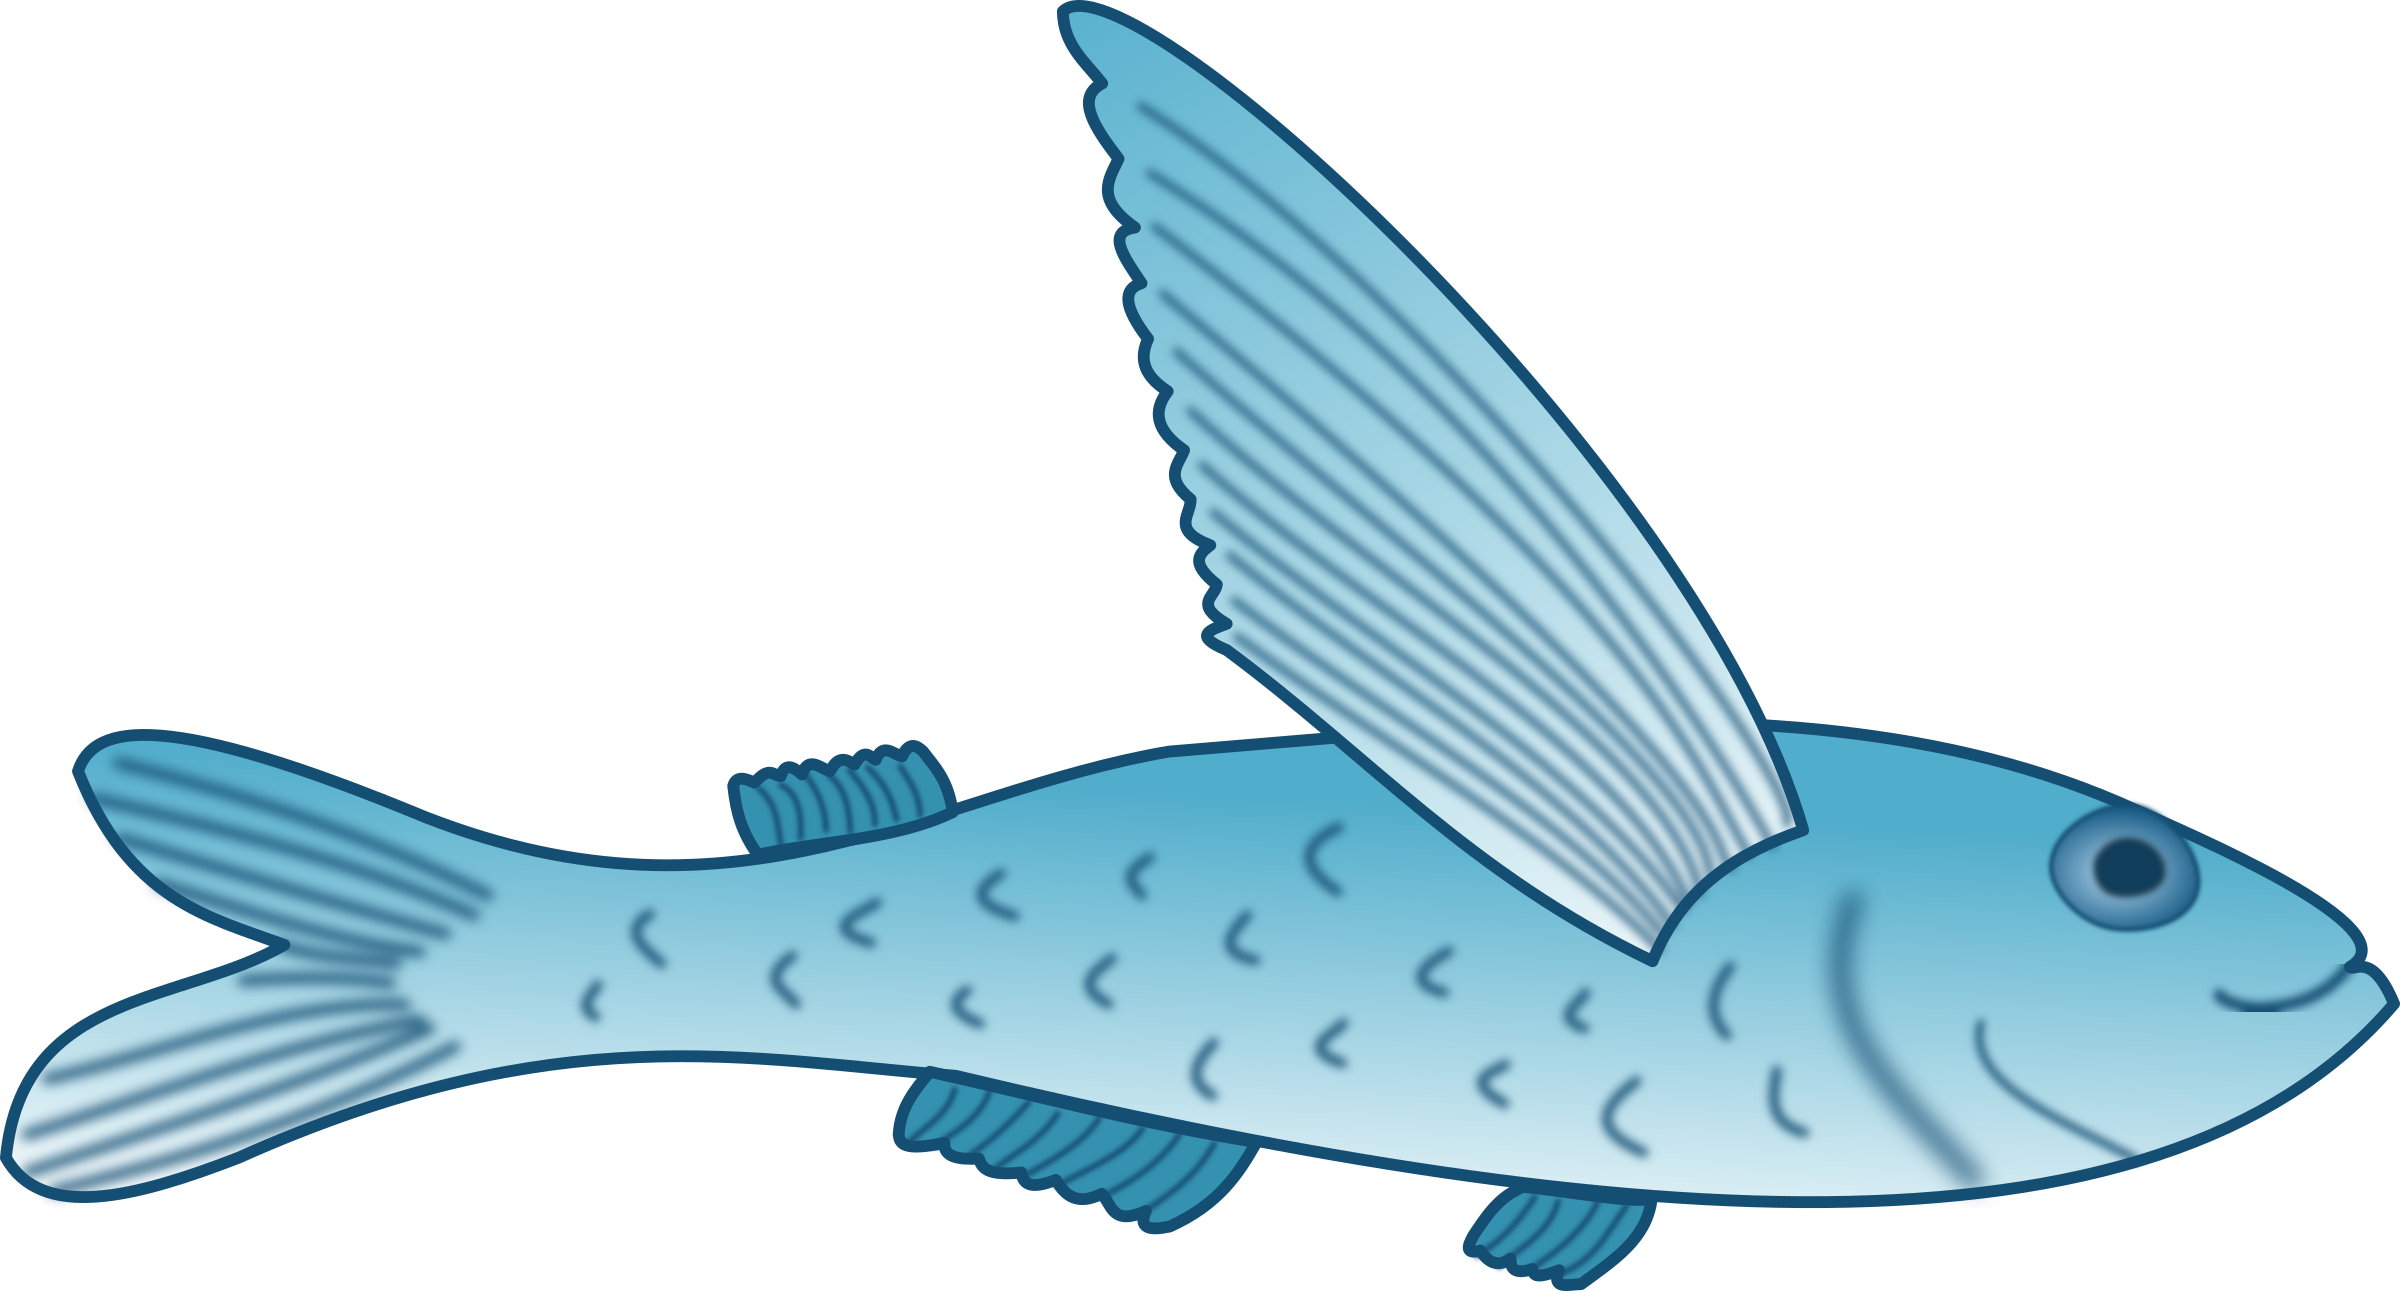 Marine Biology,organism,seafood - Fish With Fin Clipart, Hd Png Download